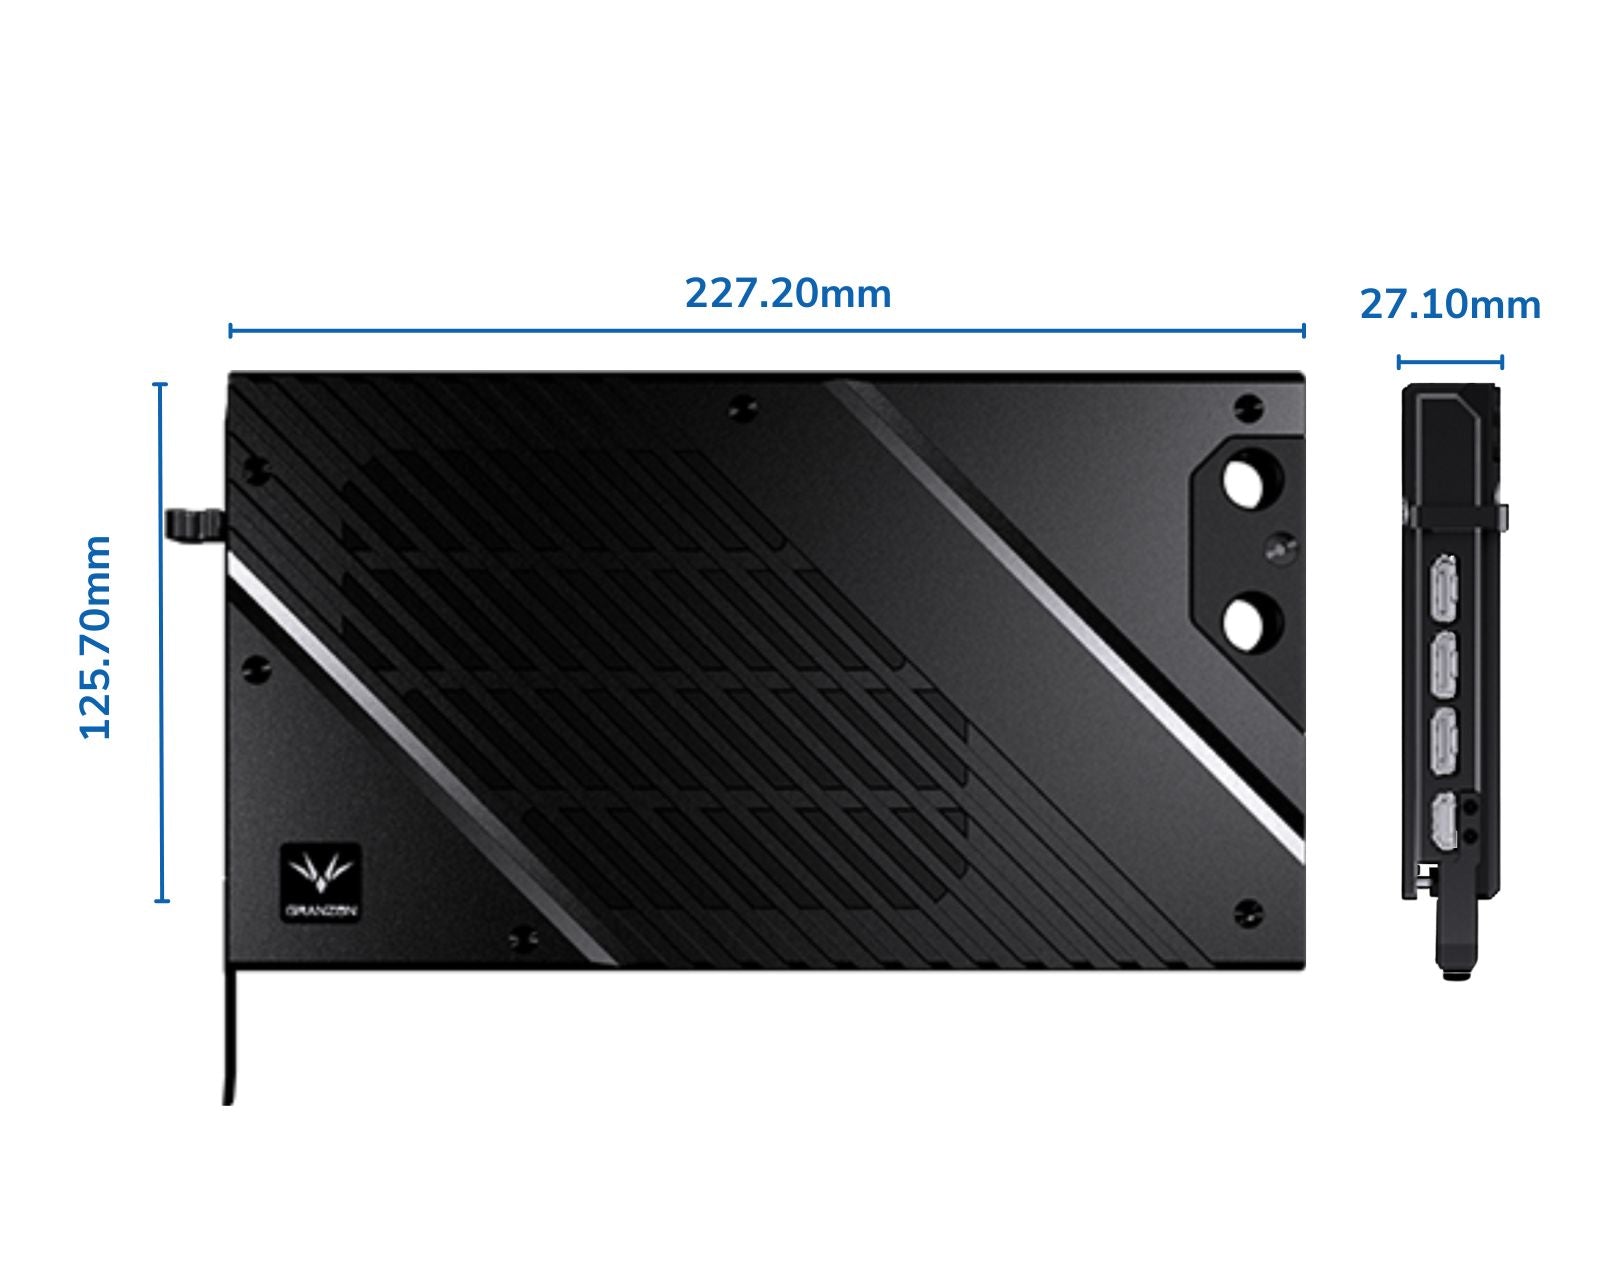 Granzon Full Armor GPU Water Block and Backplate for NVIDIA RTX 4080 Founders Edition (GBN-RTX4080FE)